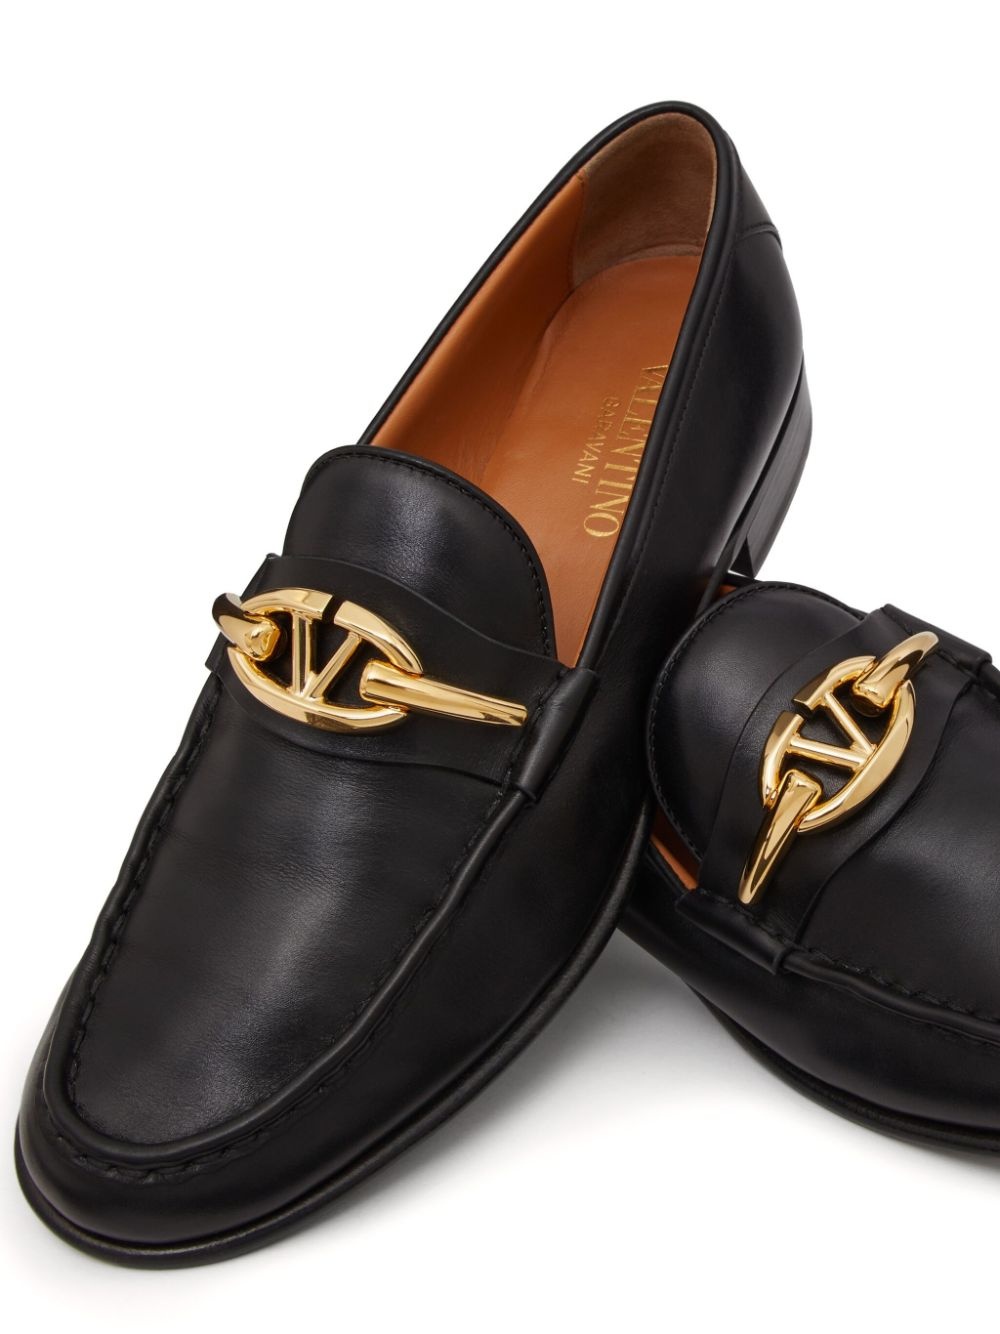 VLogo Moon leather loafers - 5